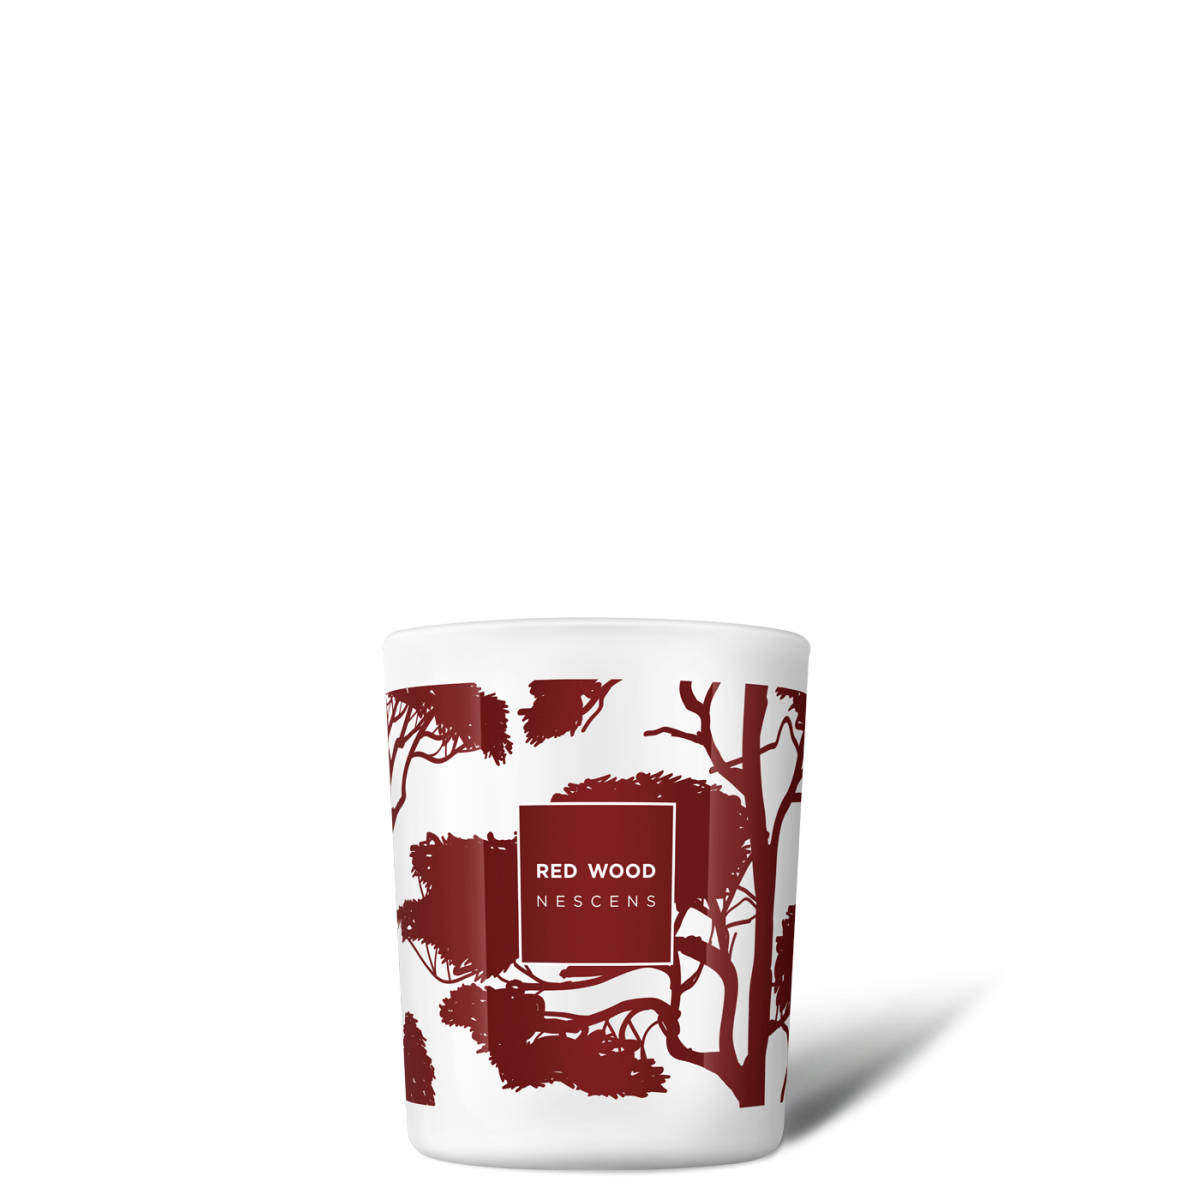 Red wood - Limited edition scented candle - NSP-BG06